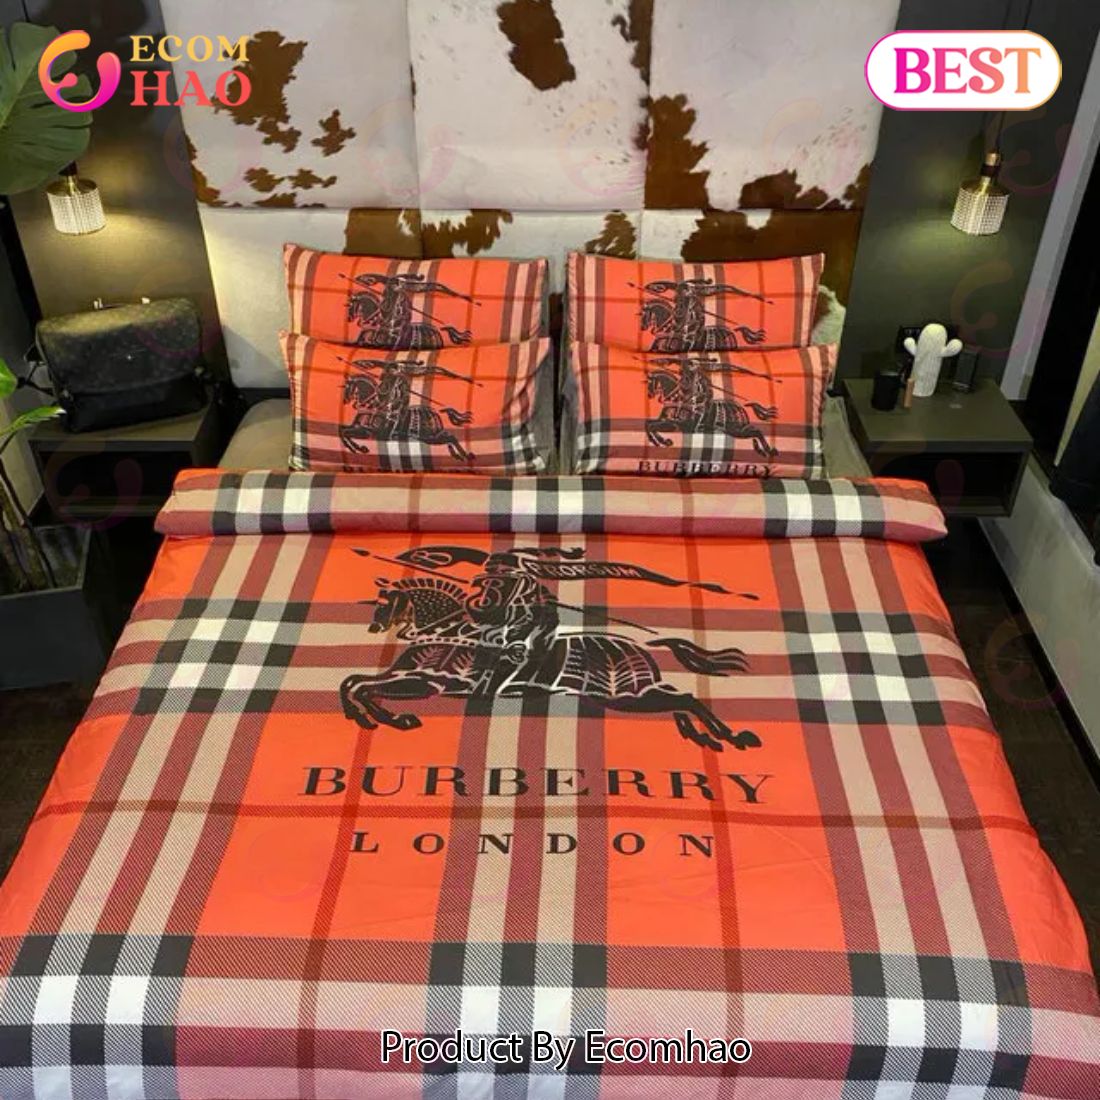 Burberry Bedding Orange Luxury Bedding Sets Quilt Sets Duvet Cover Luxury Brand Bedroom Sets Bedding Best Luxury Bed Sets Gift Thankgivings And Christmas Bedding Sets